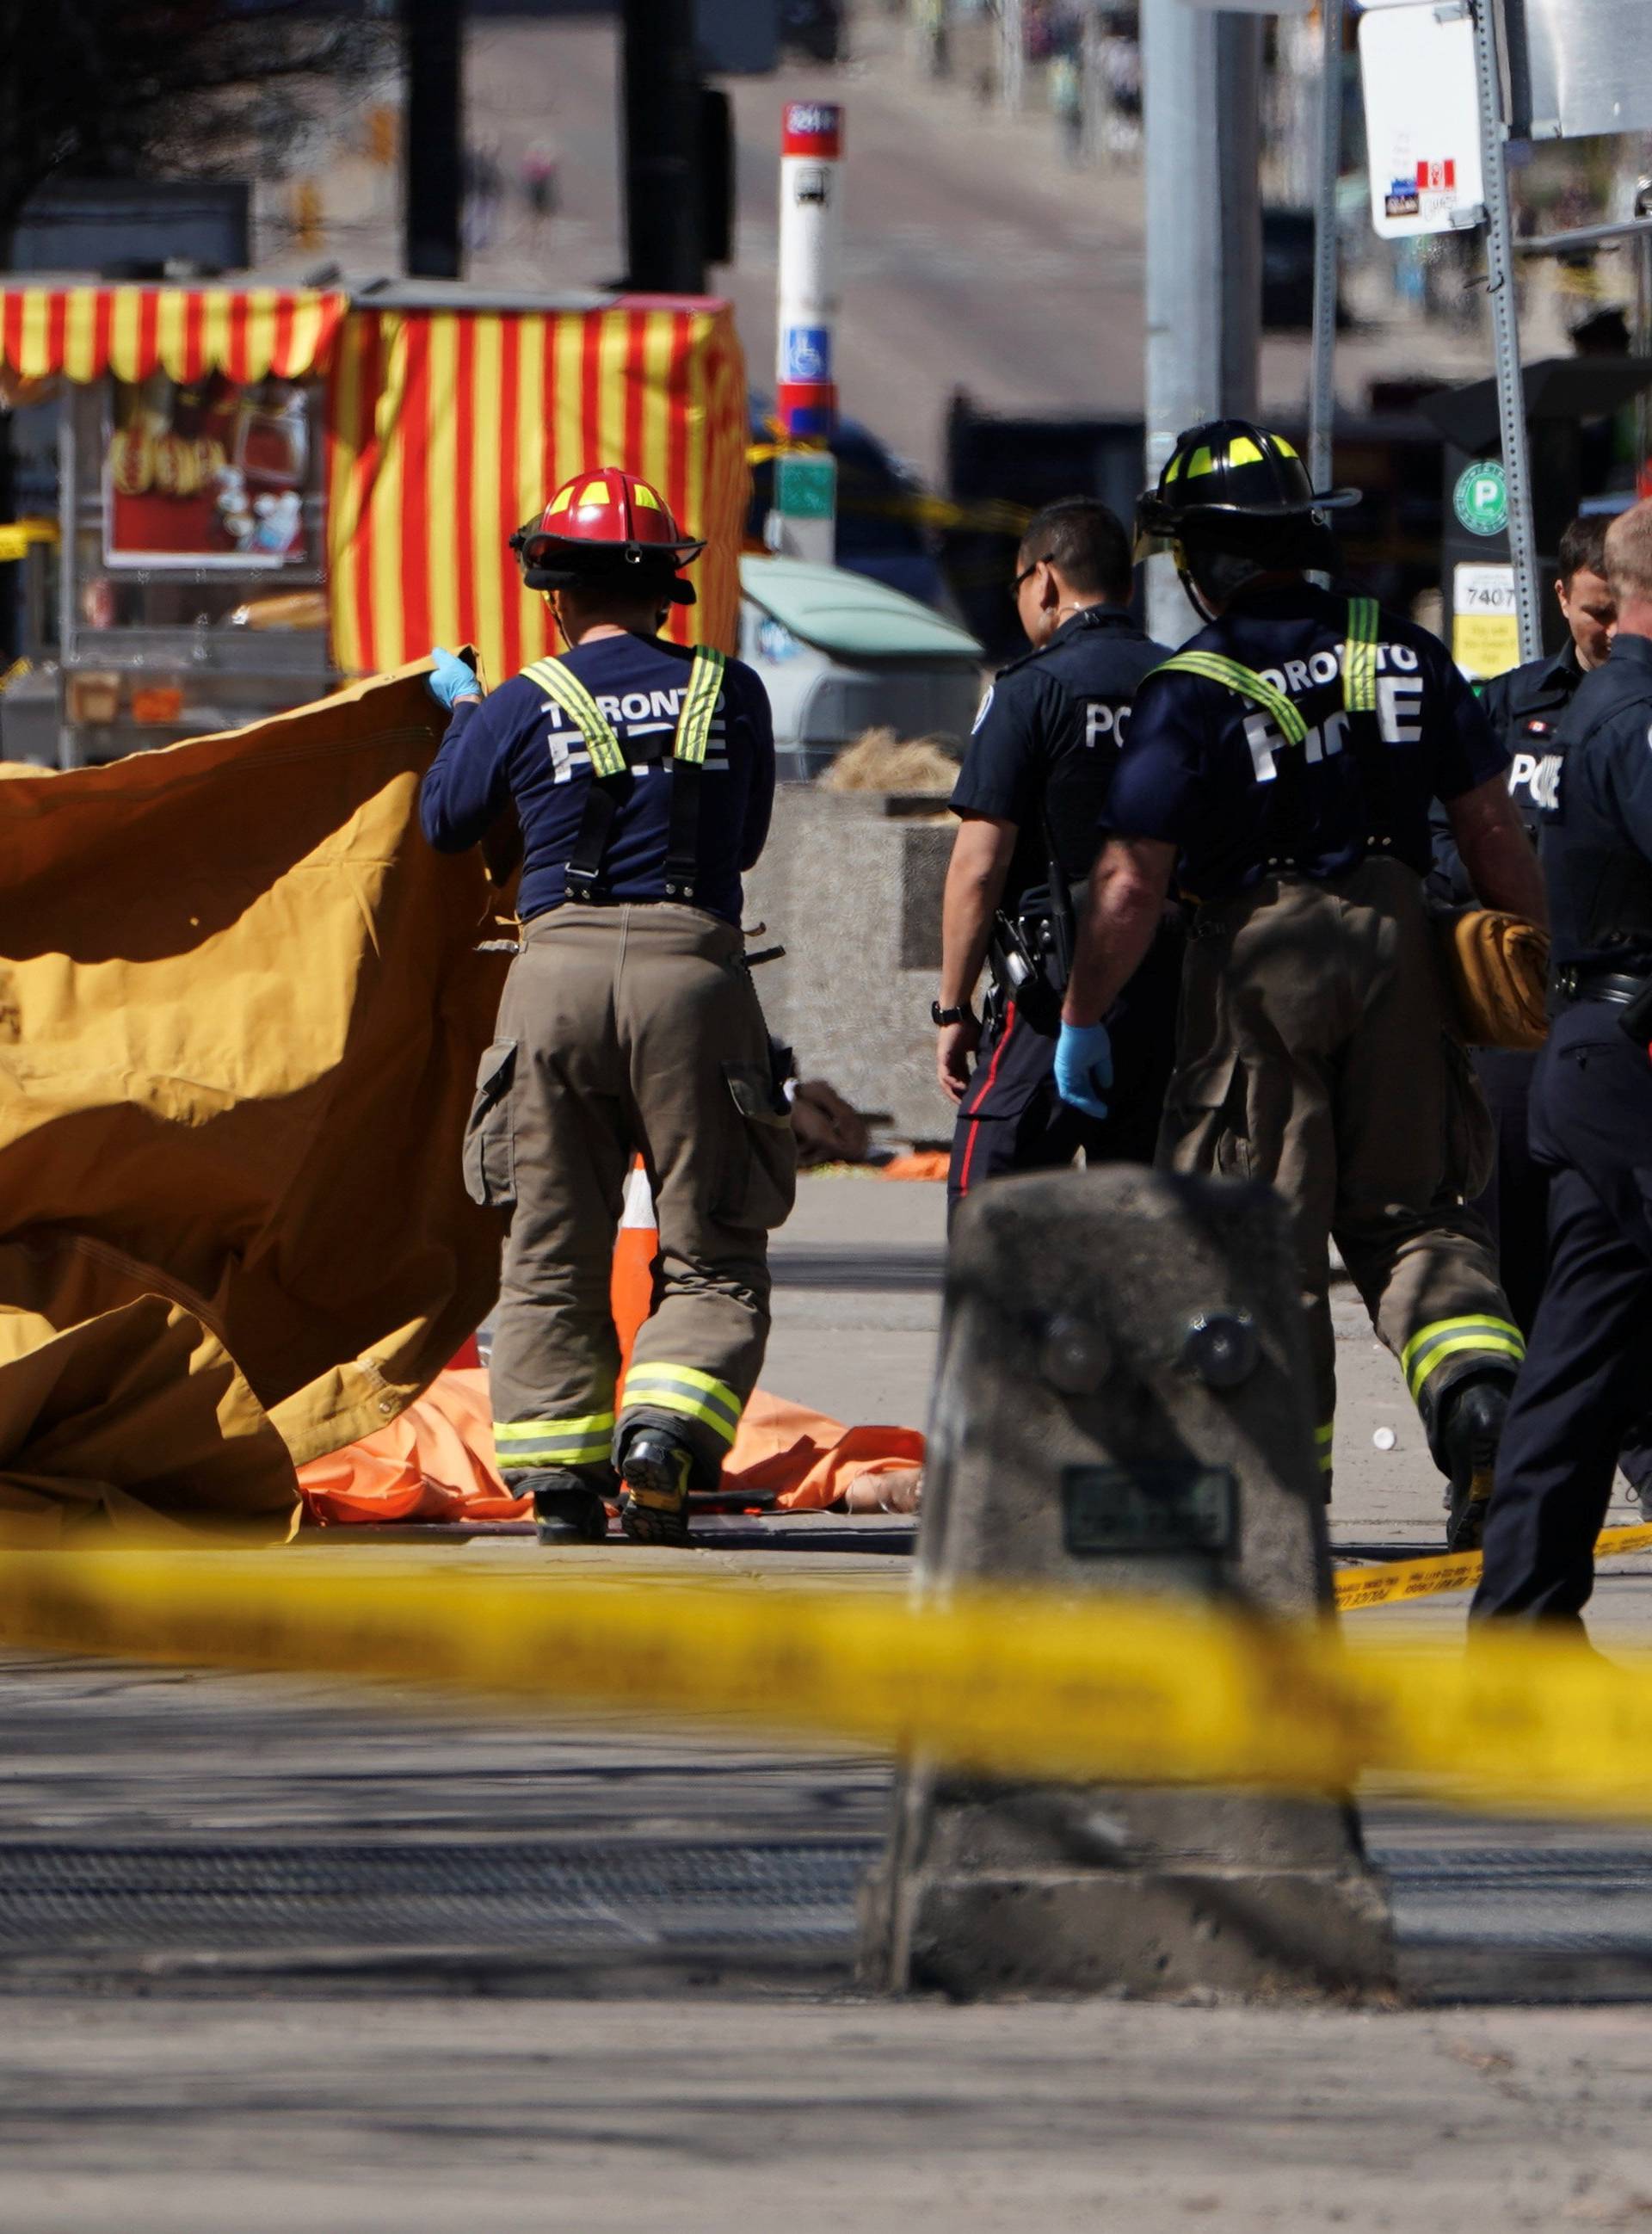 Firemen cover a victim of an incident where a van struck multiple people at a major intersection in Toronto's northern suburbs